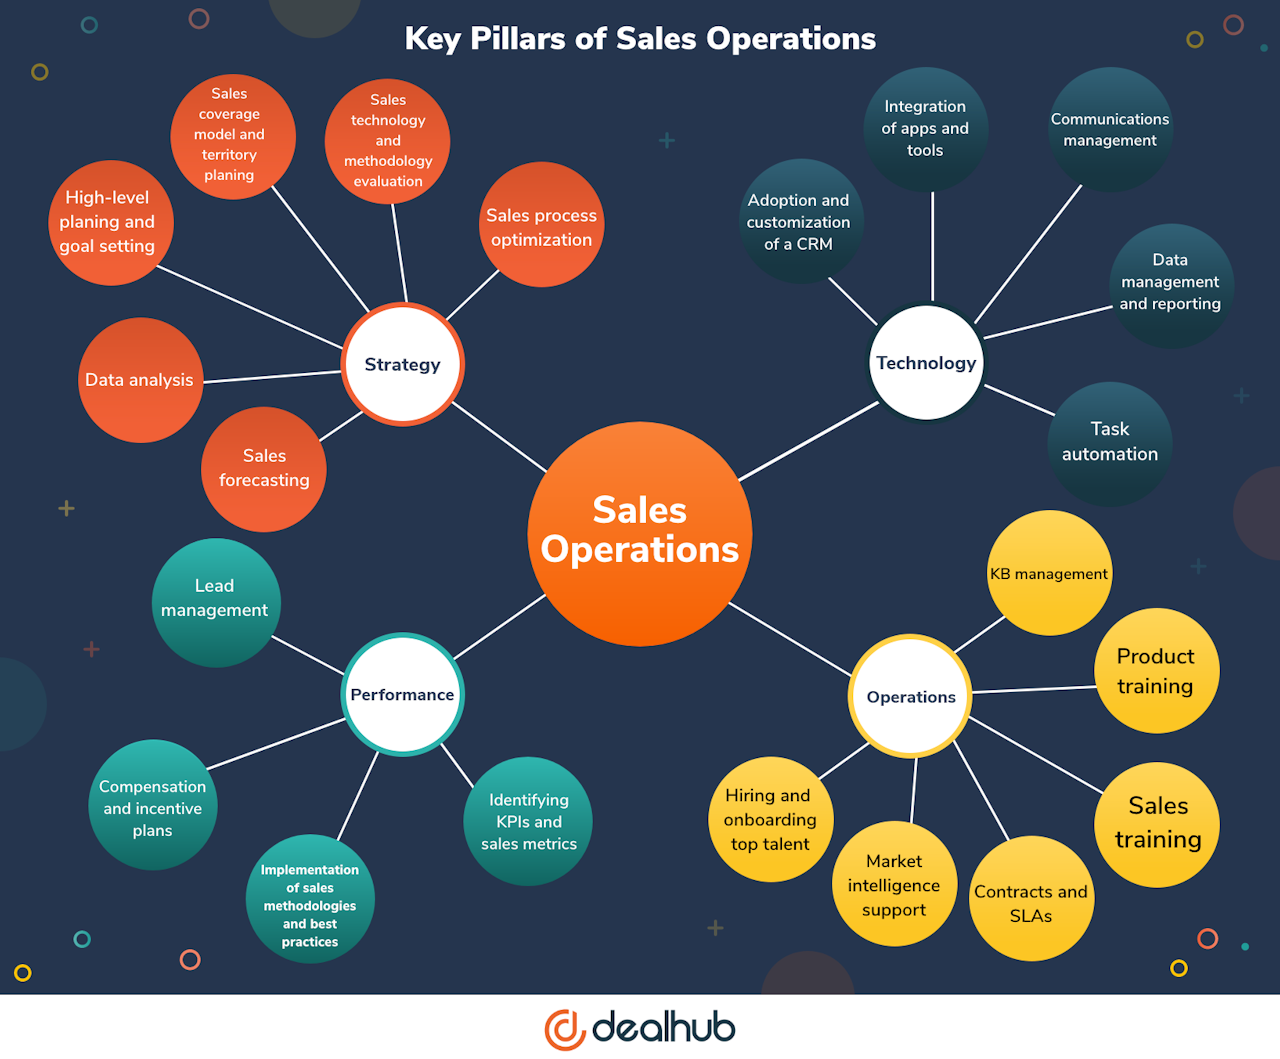 Sales Operations Manager: key pillars of sales operations